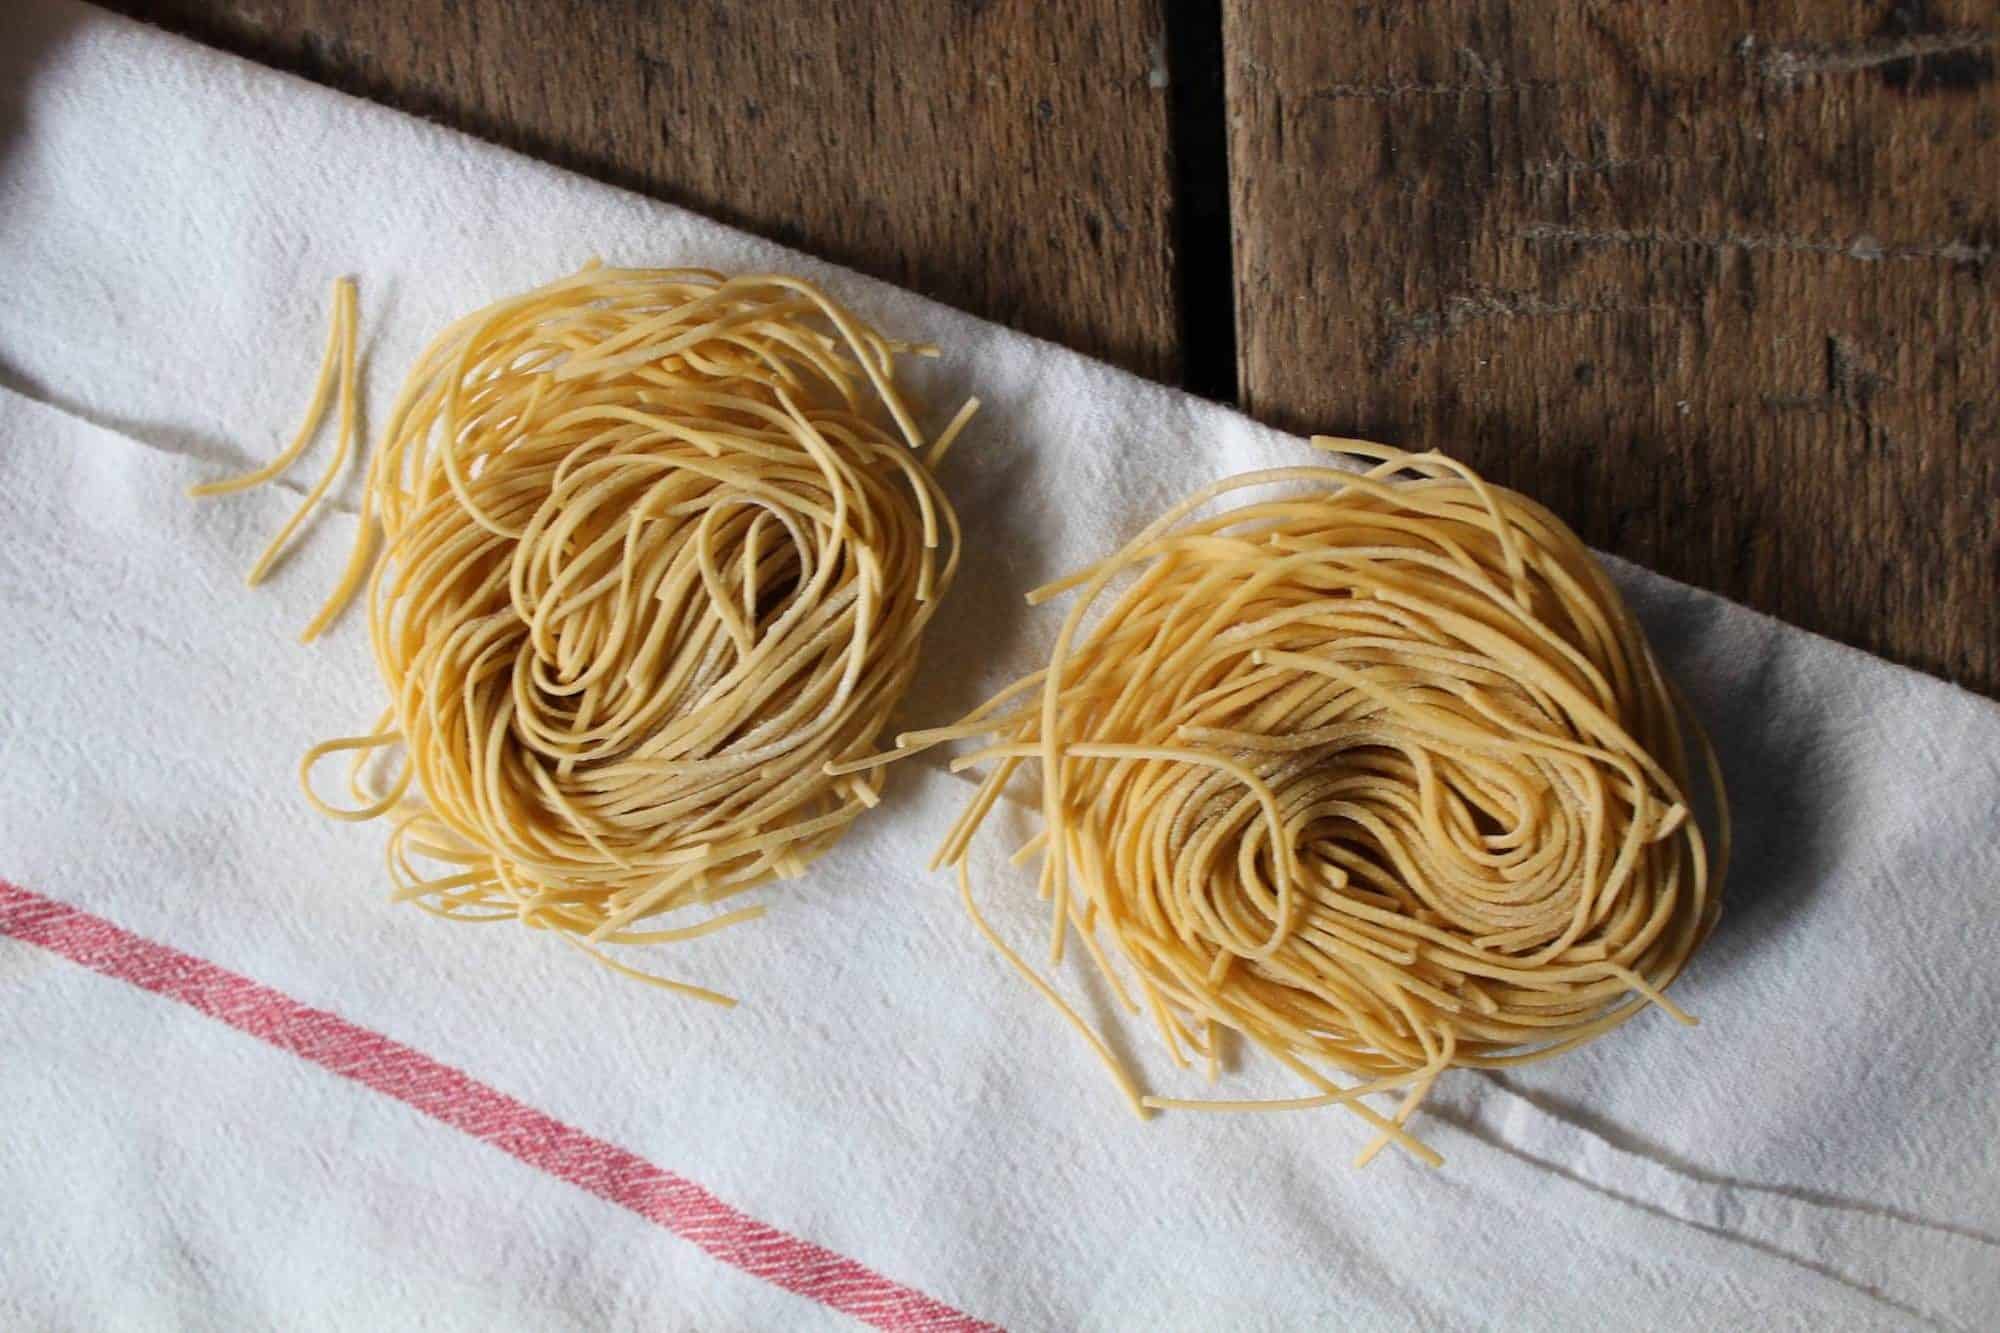 For some of the best homemade pasta in Paris, head to Pastifico in the Marais.